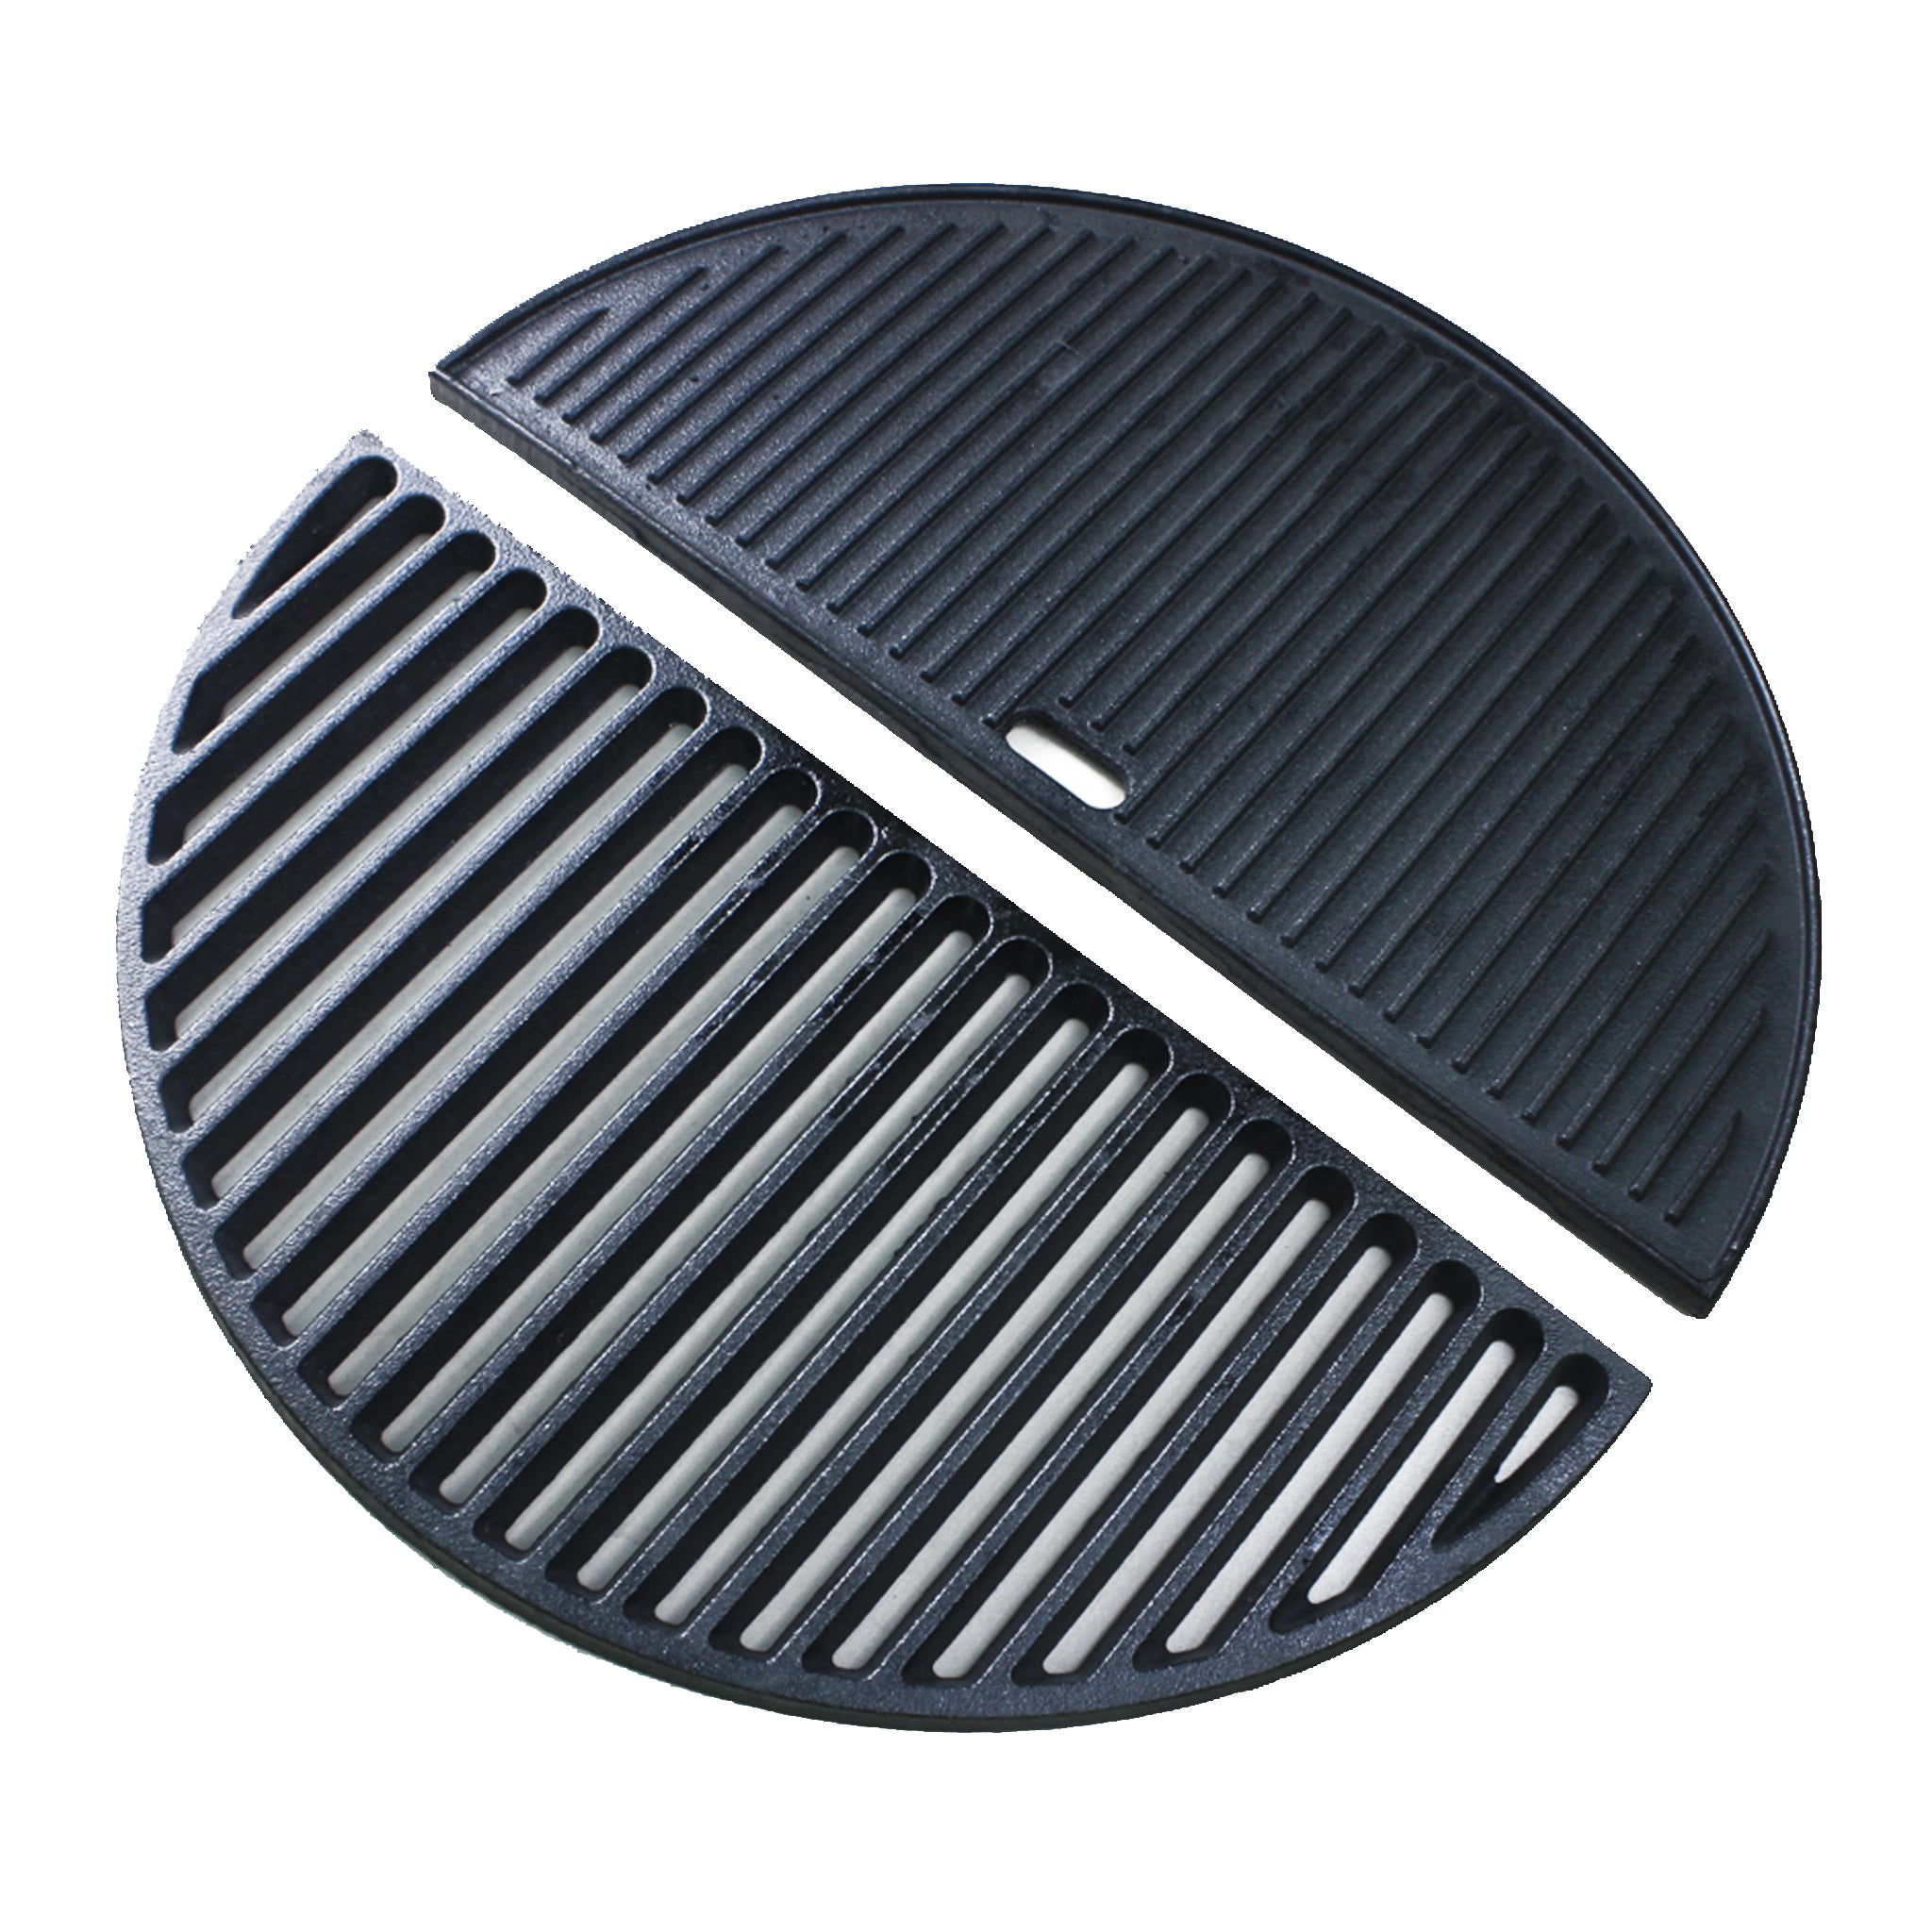 Kamado Half Moon Cast Iron Griddle for 21" & 22" Grill